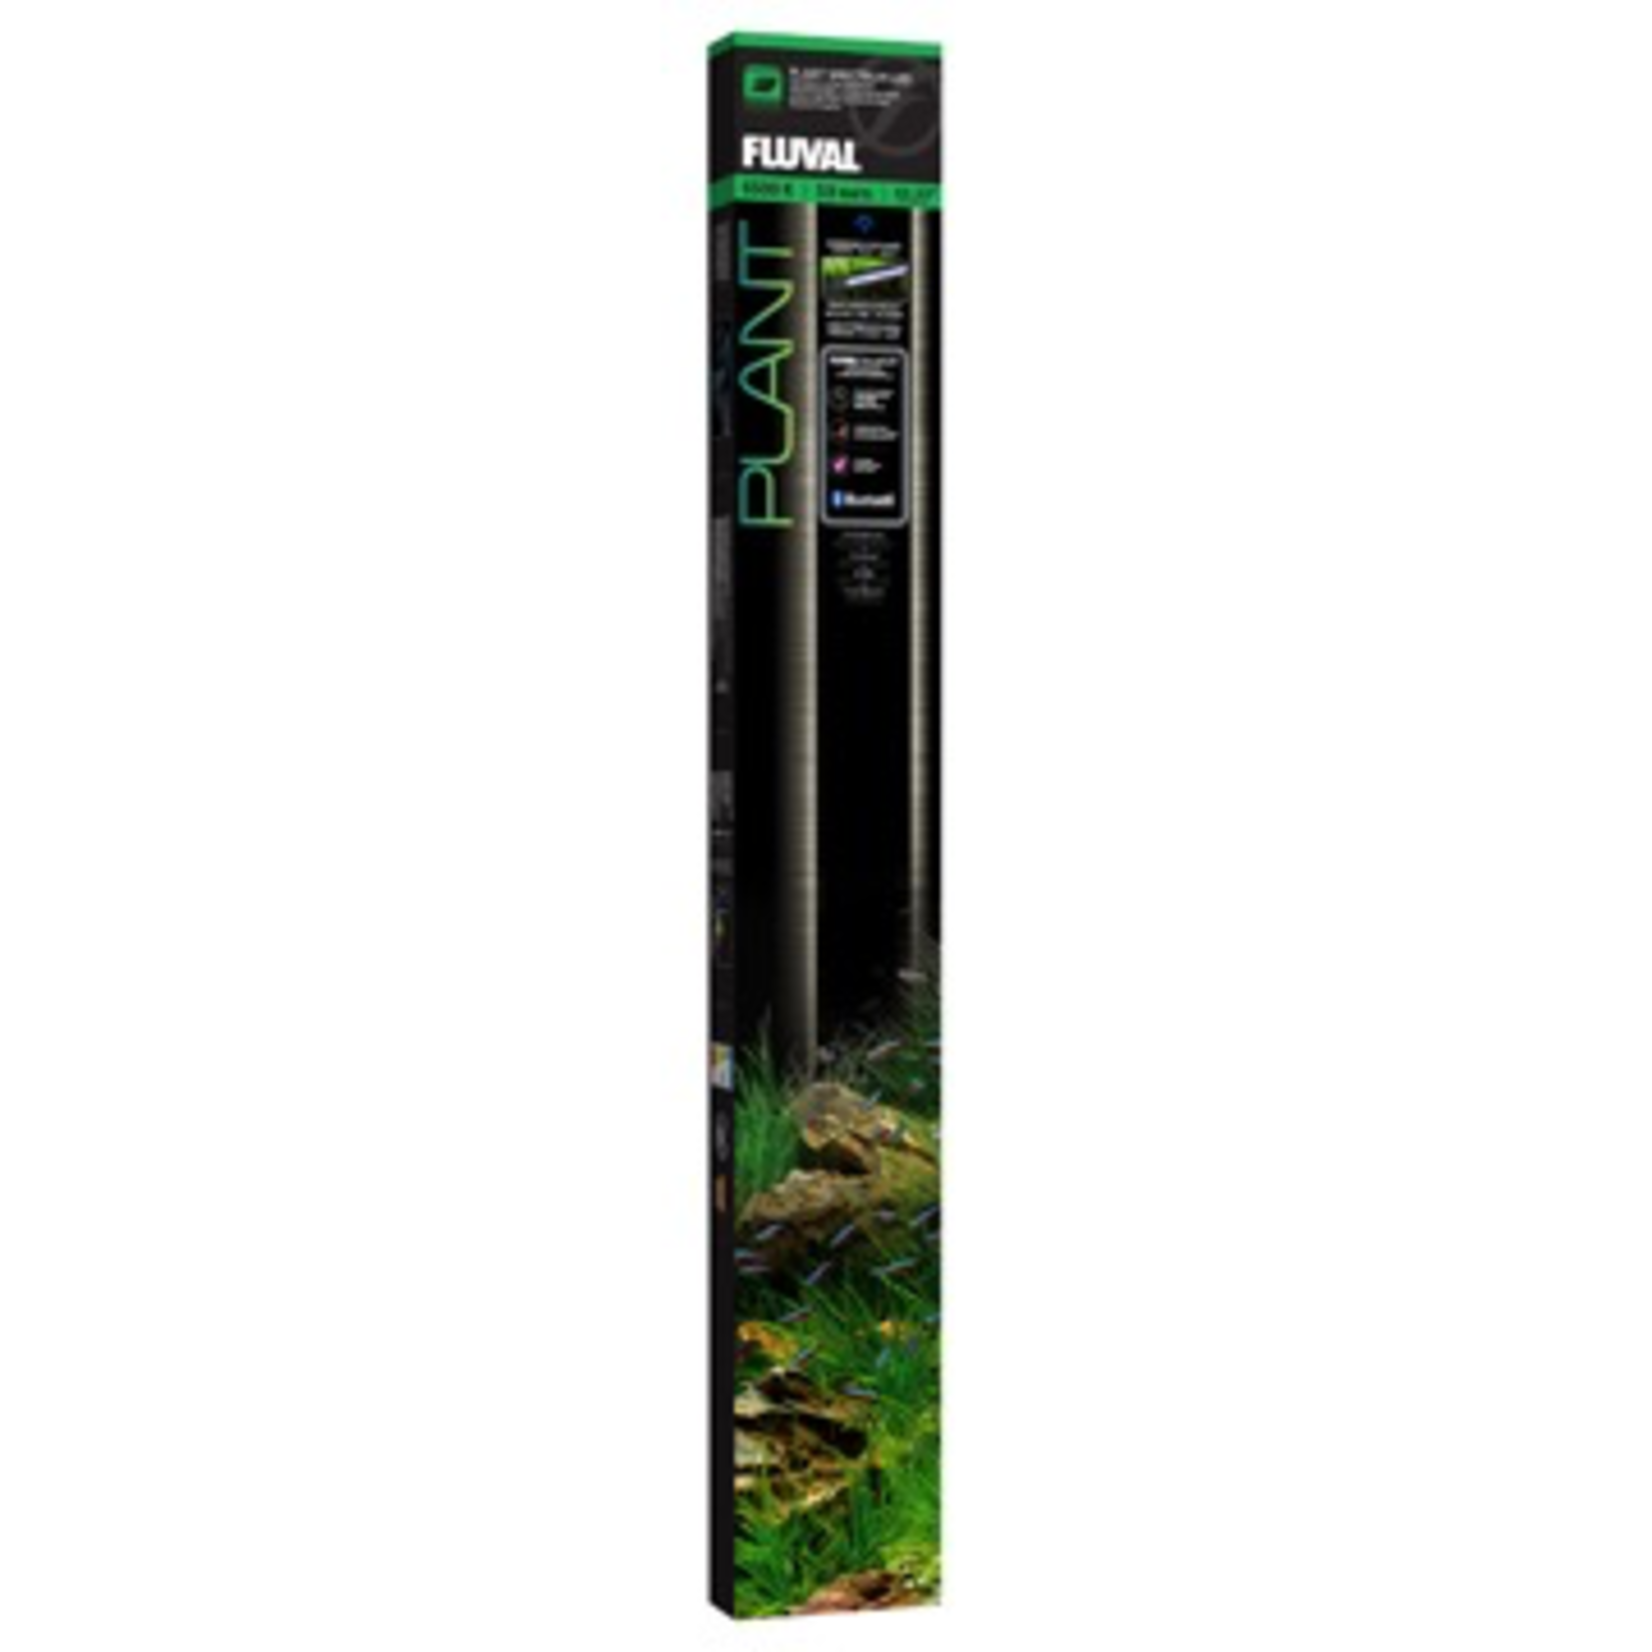 FLUVAL (W) Fluval Plant Spectrum LED with Bluetooth - 59 W - 48-60 in (122-153 cm)